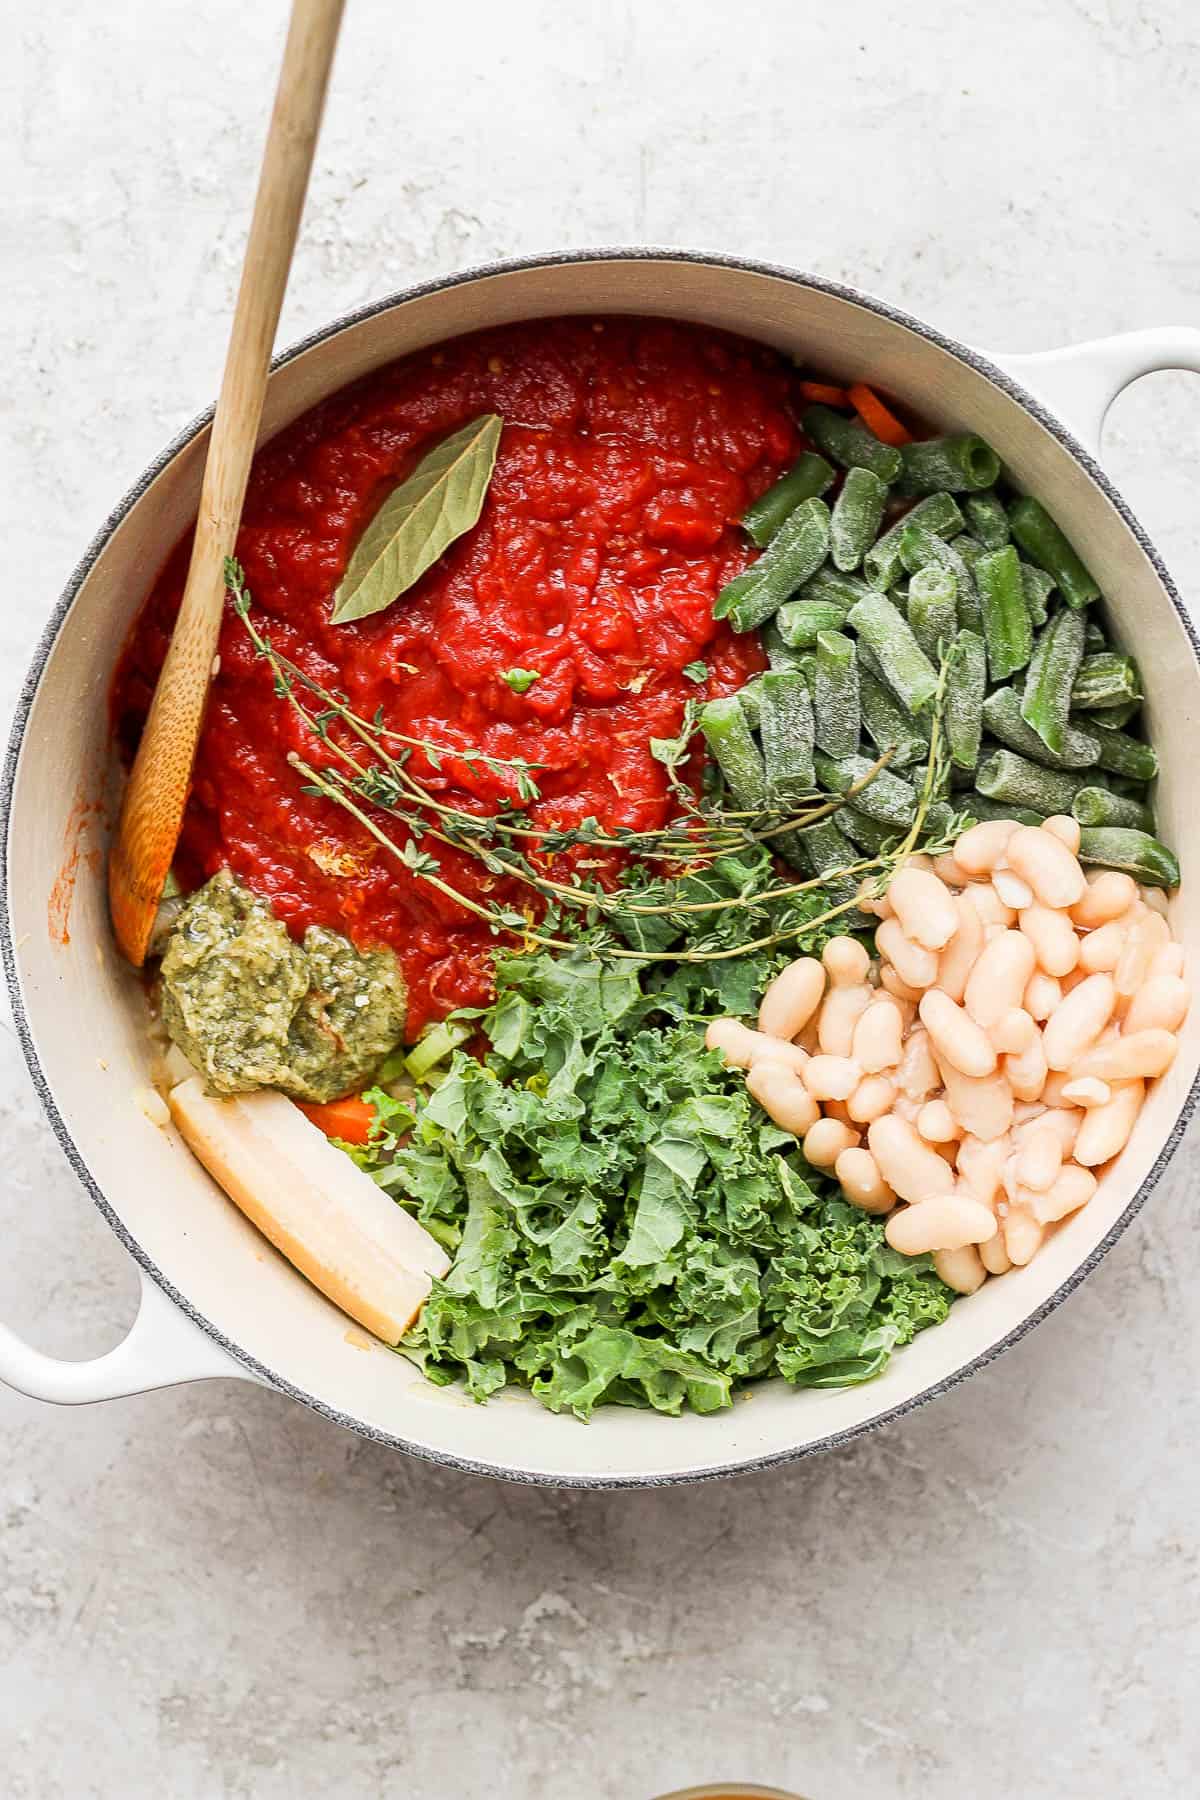 Crushed tomatoes, green beans, cannellini beans, kale, pesto, parmesan rind, fresh thyme, bay leaf, and lemon zest added to the pot.